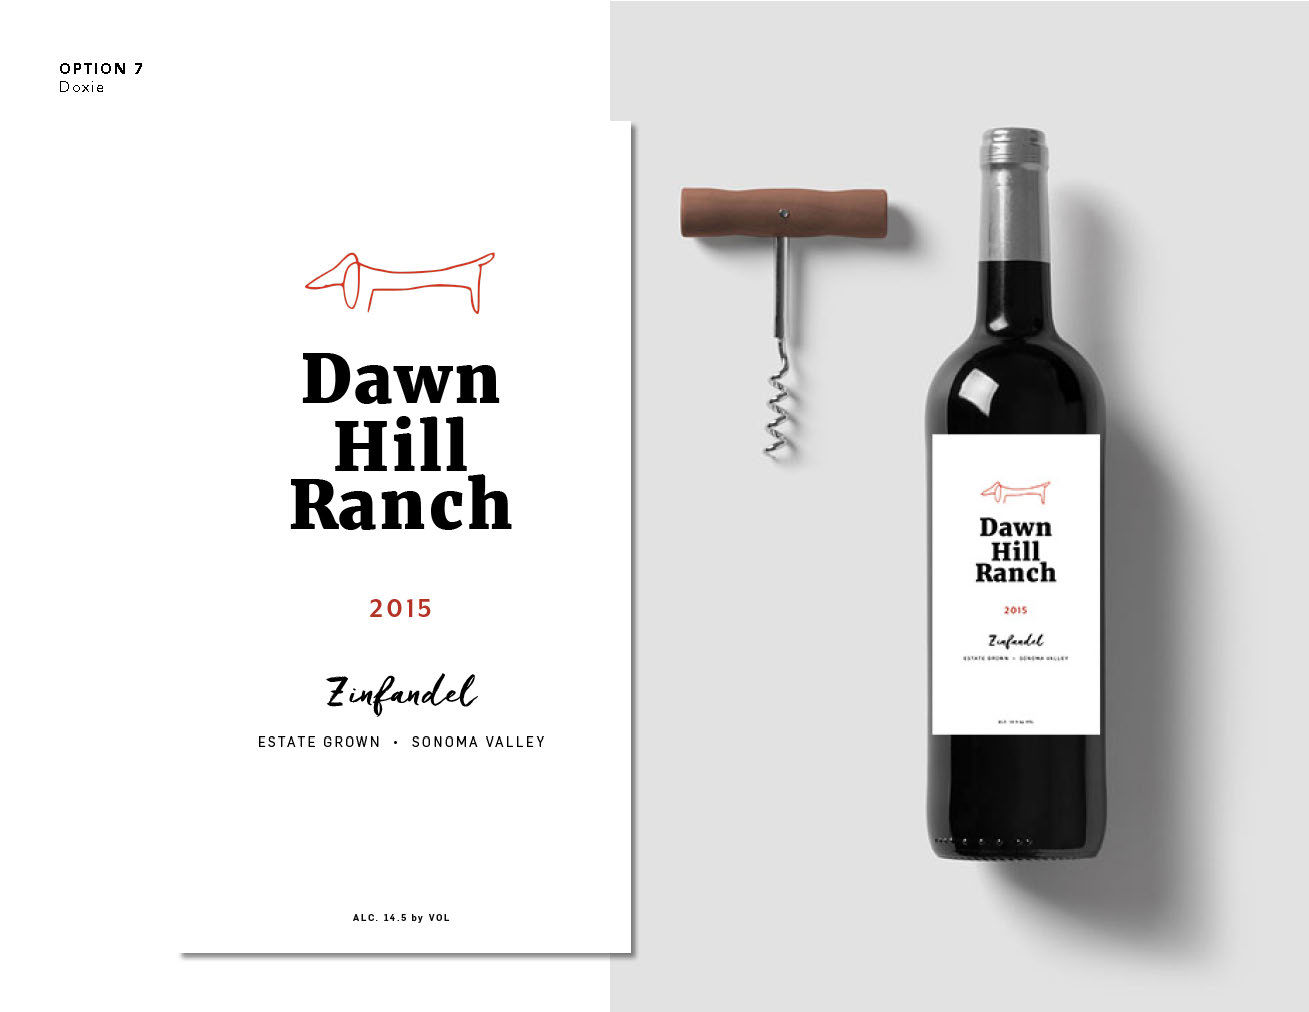  The vineyard is a family affair, including their beloved wire-haired dachshund who earned a spot as the winery mascot. This label was designed to honor him with a custom sketch to be done if chosen. *FPO artwork shown by Picasso 